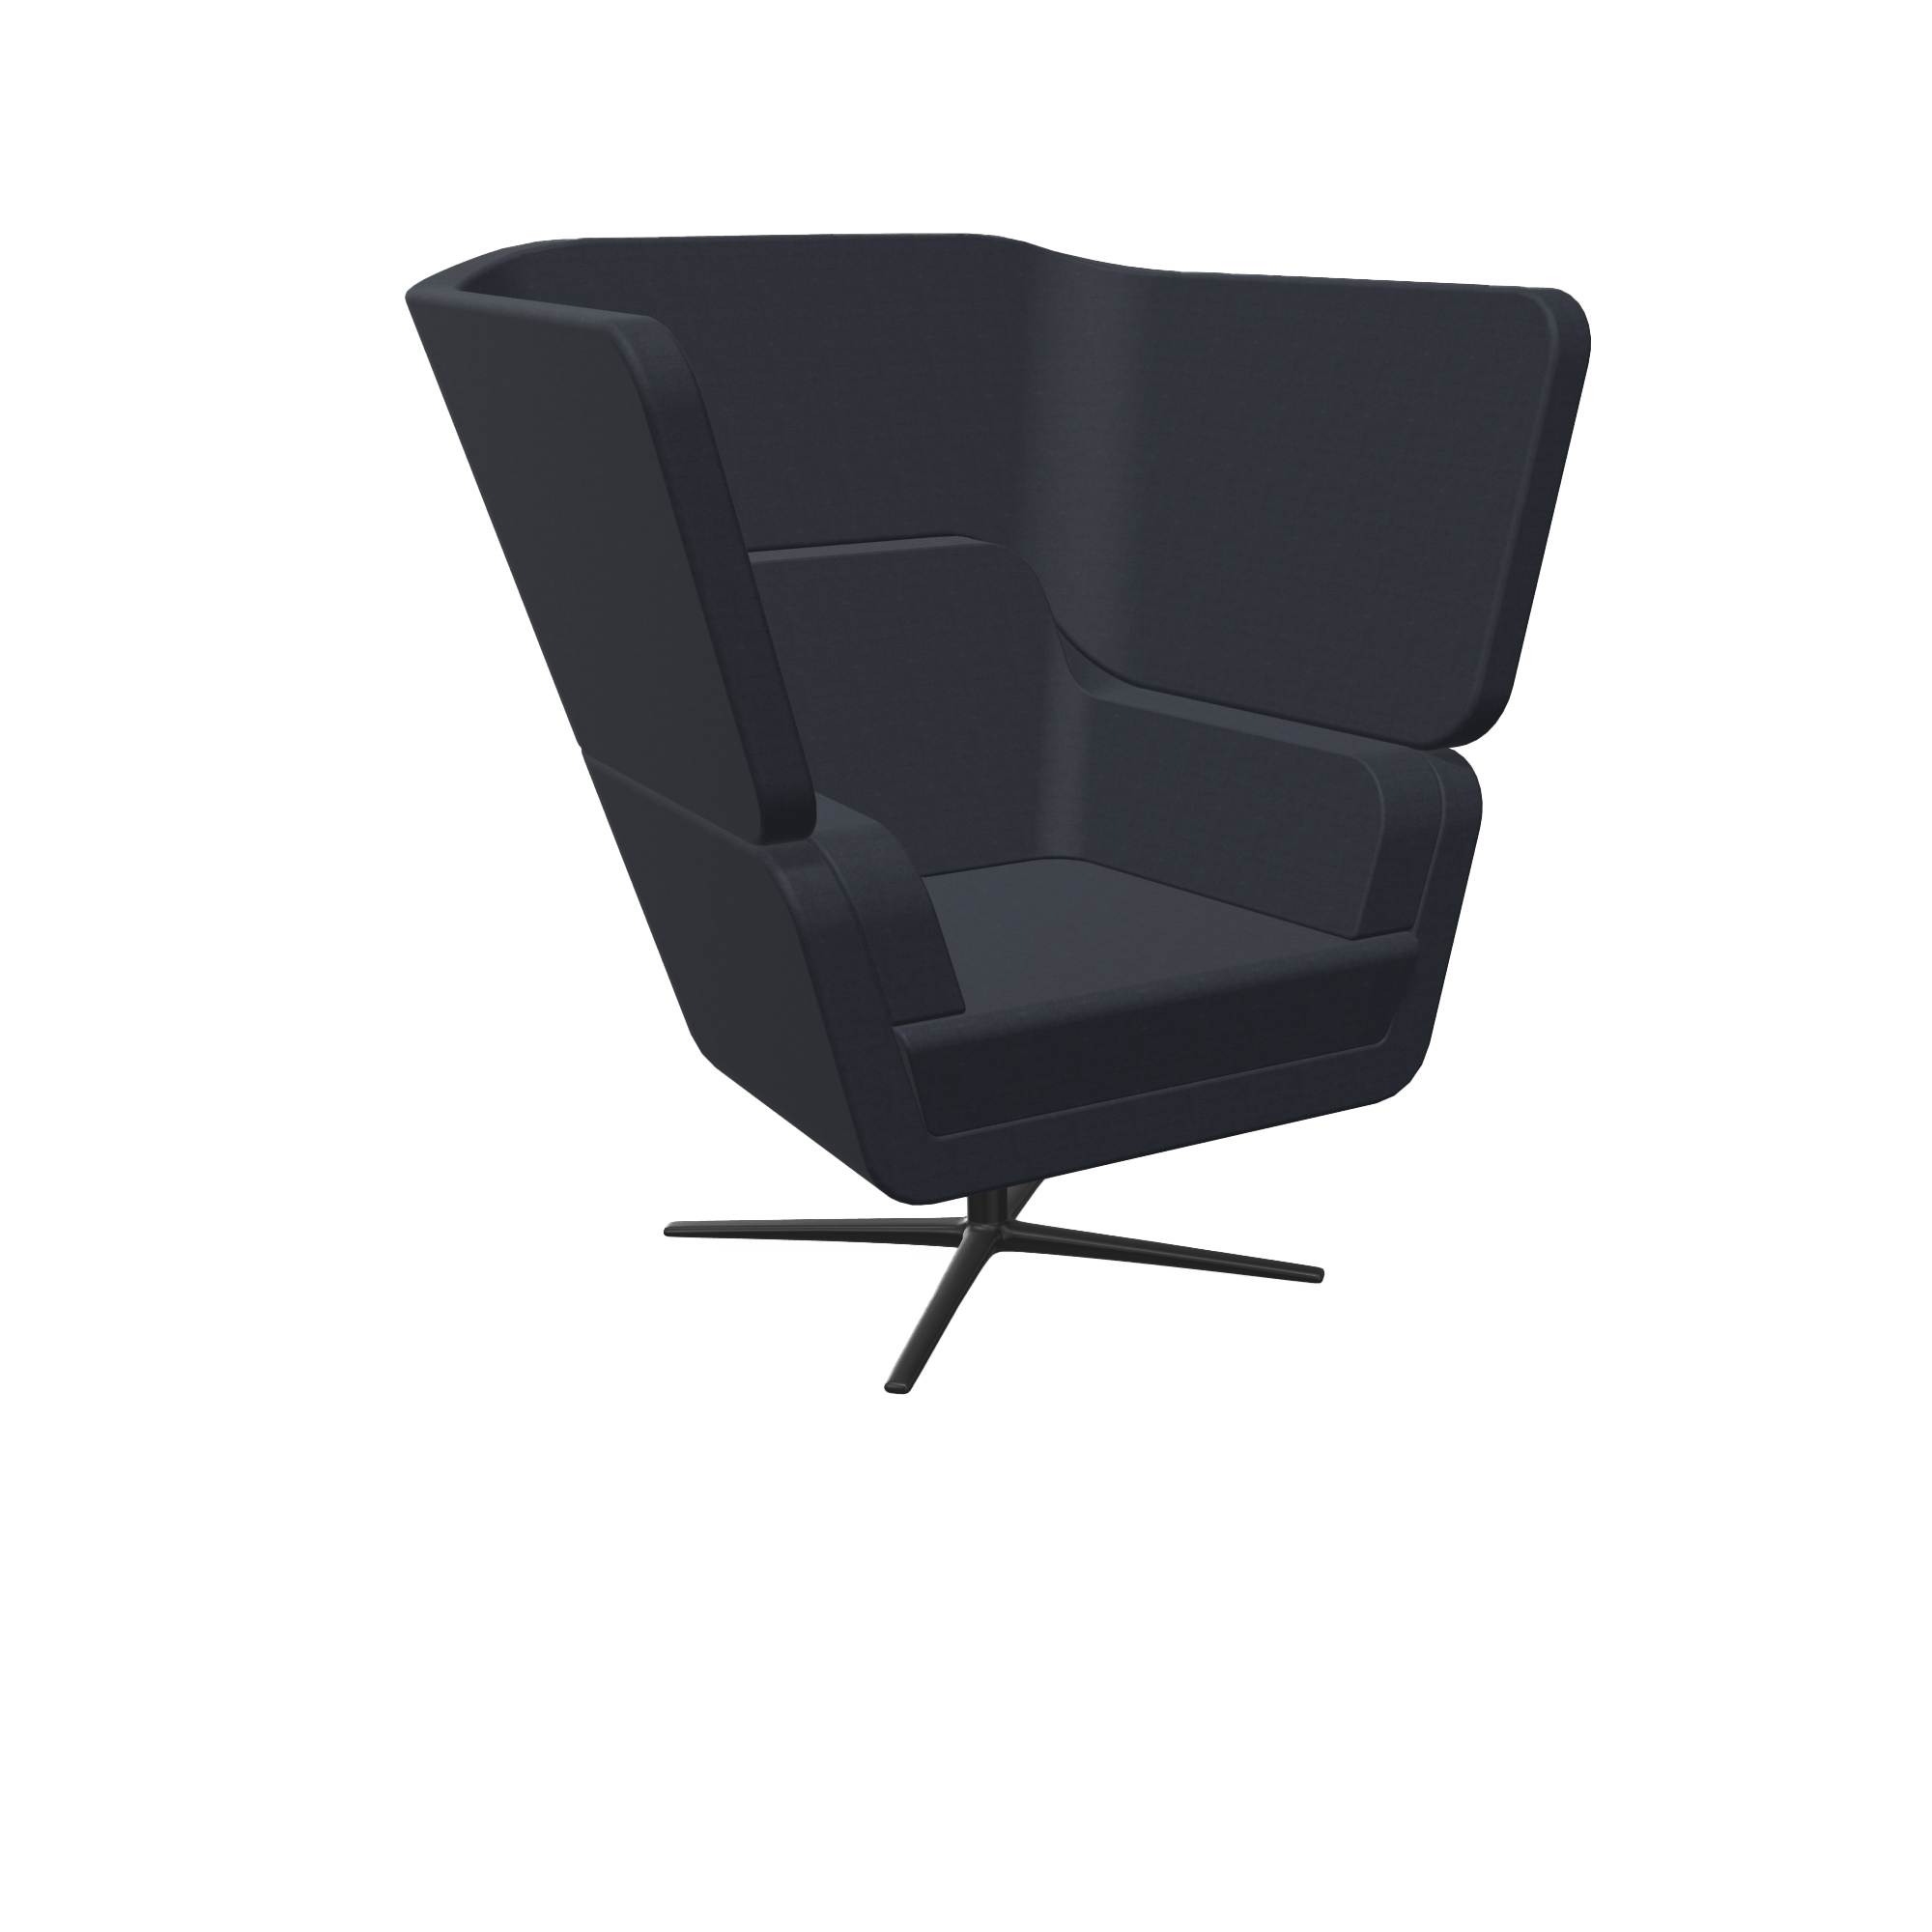 A black lounge chair on a white background.